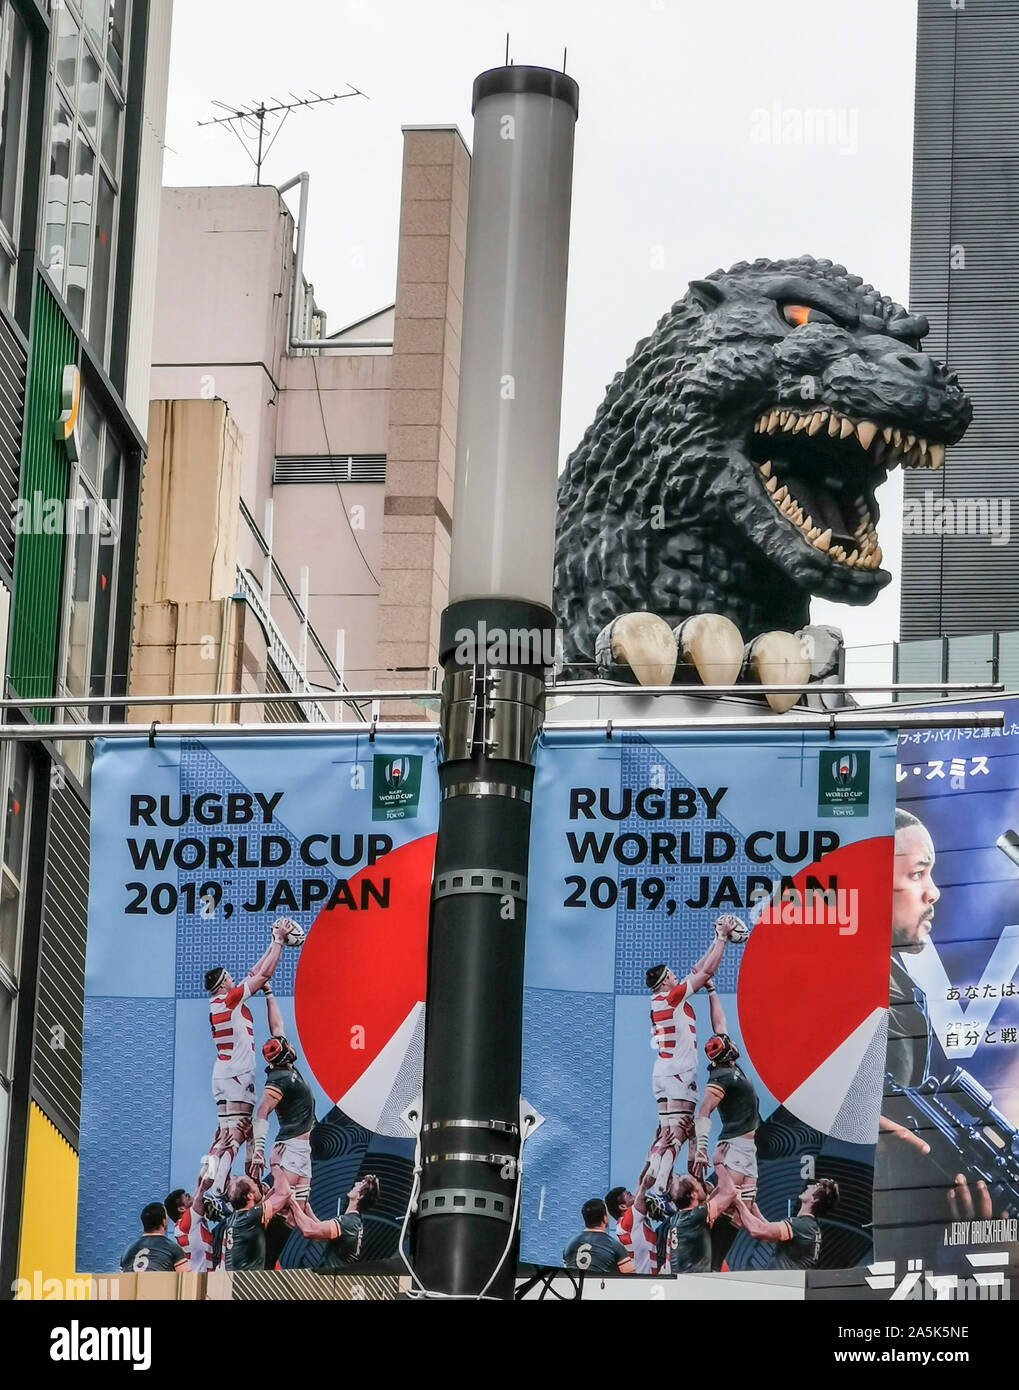 GODZILLA AND RUGBY WORLD CUP TOKYO Stock Photo